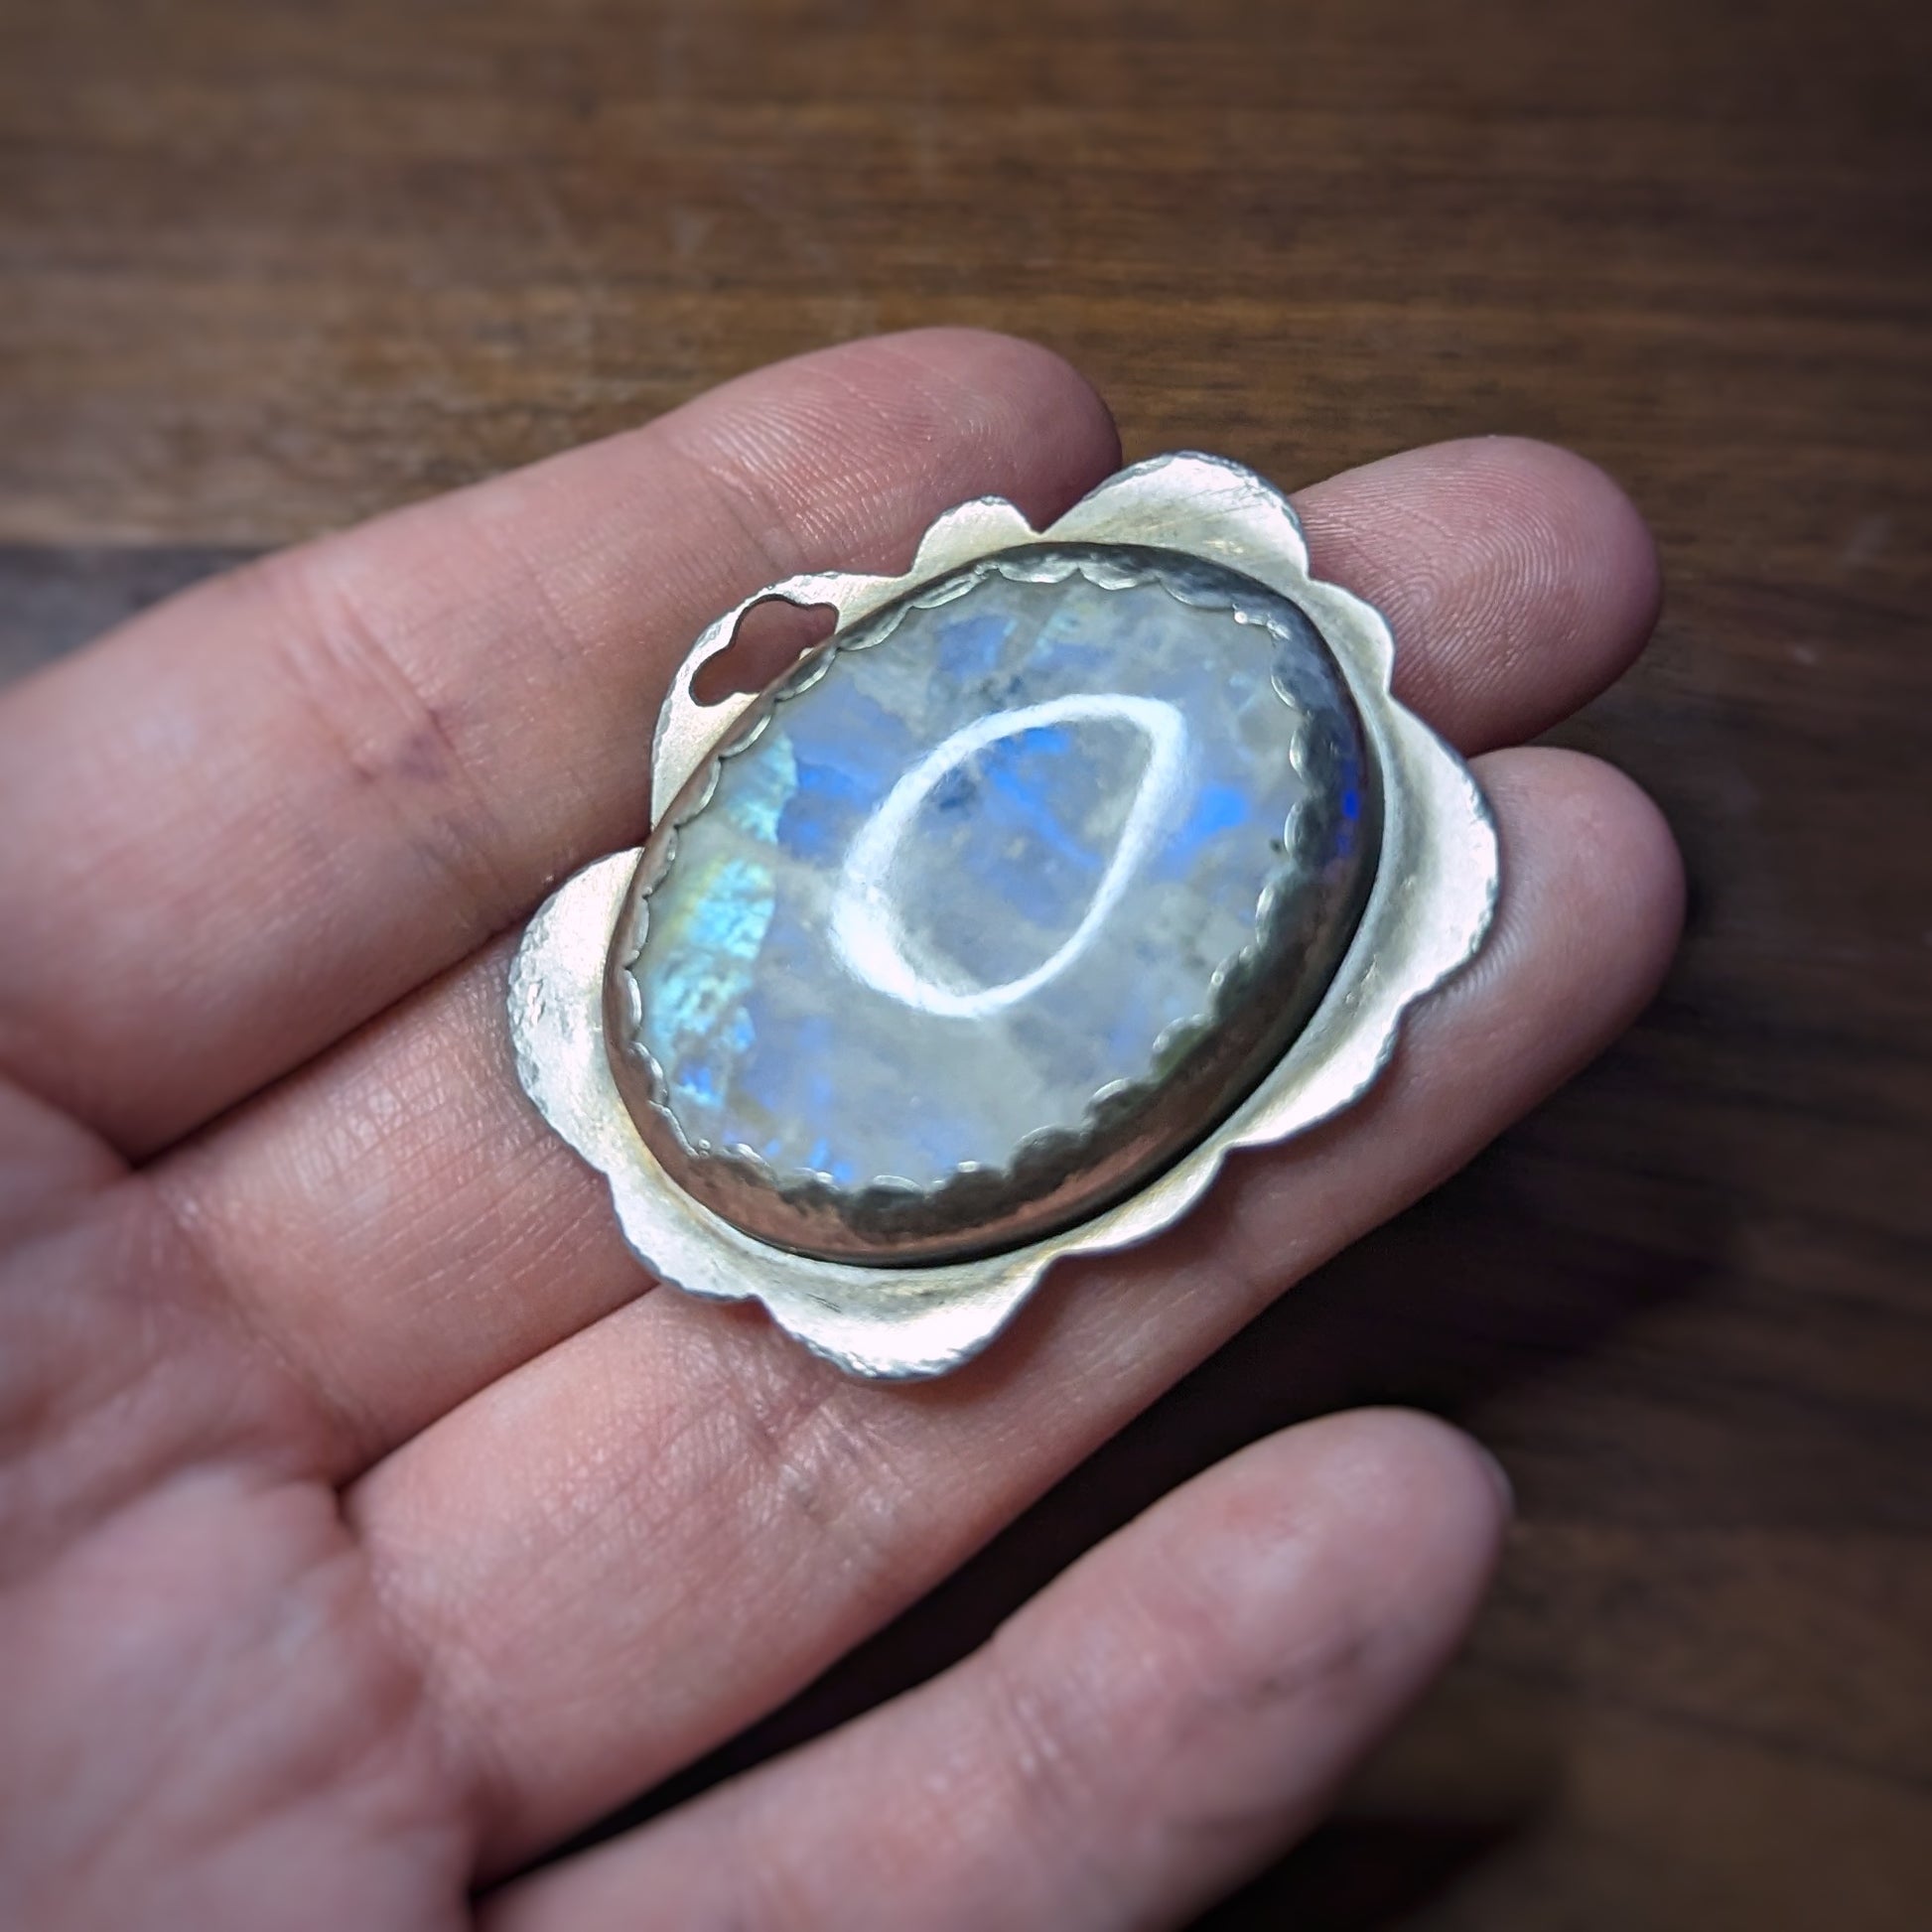 A hand holds a silver cloud pendant with a large oval moonstone in a scalloped edge setting with hammered details on the edges, the moonstone flashing bright blue in the angled light.